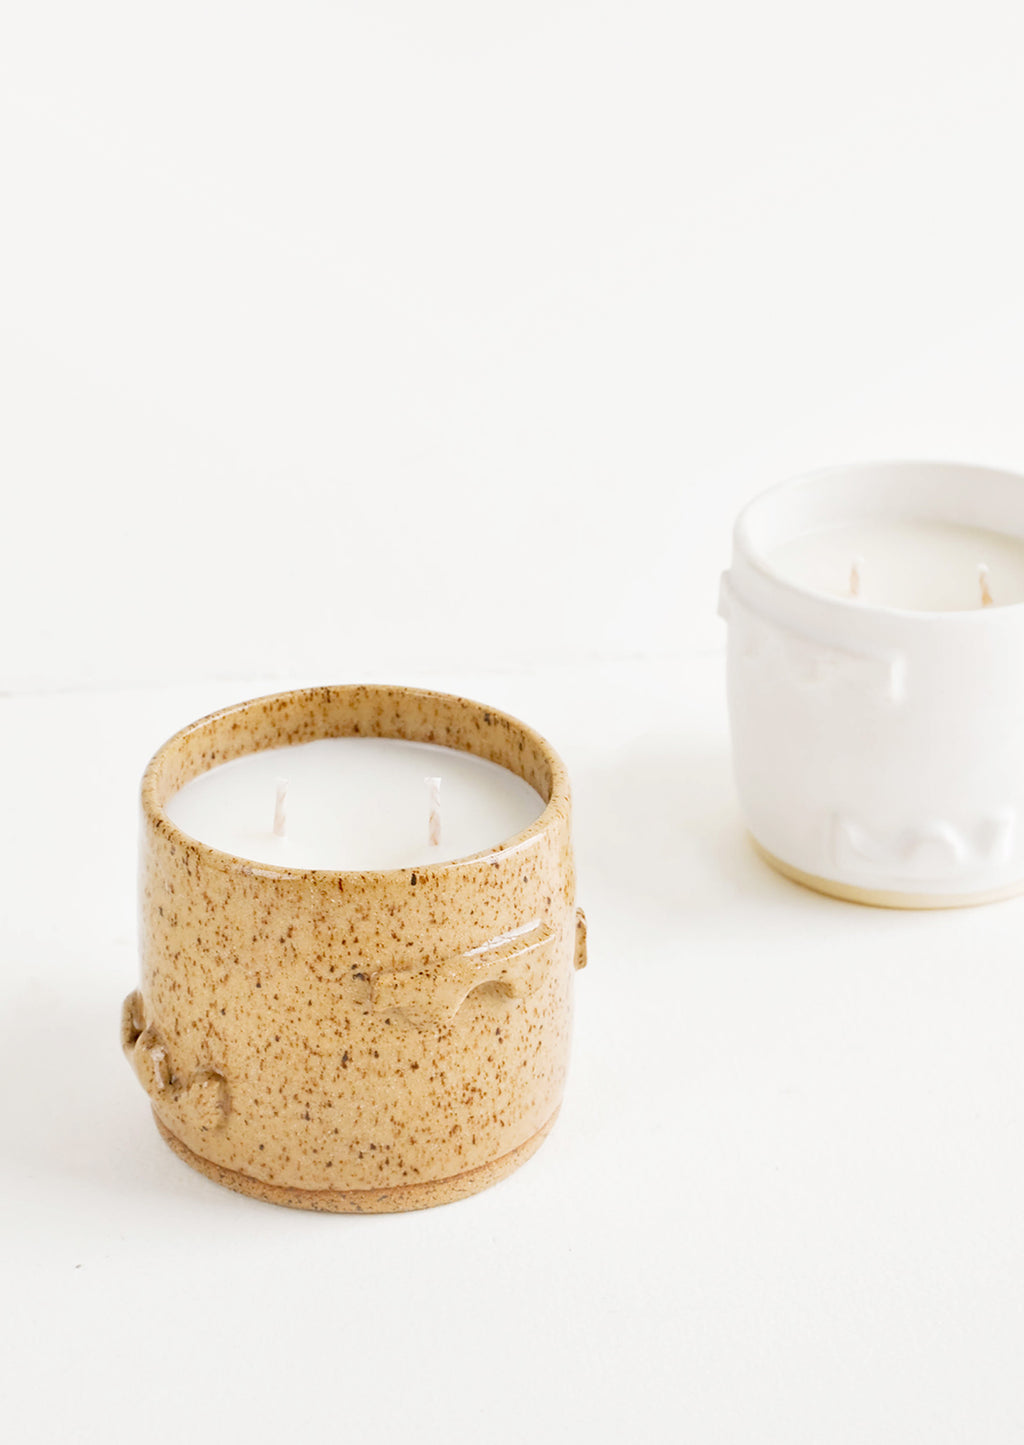 1: A candle in a light brown ceramic container with one in a white ceramic container just behind.